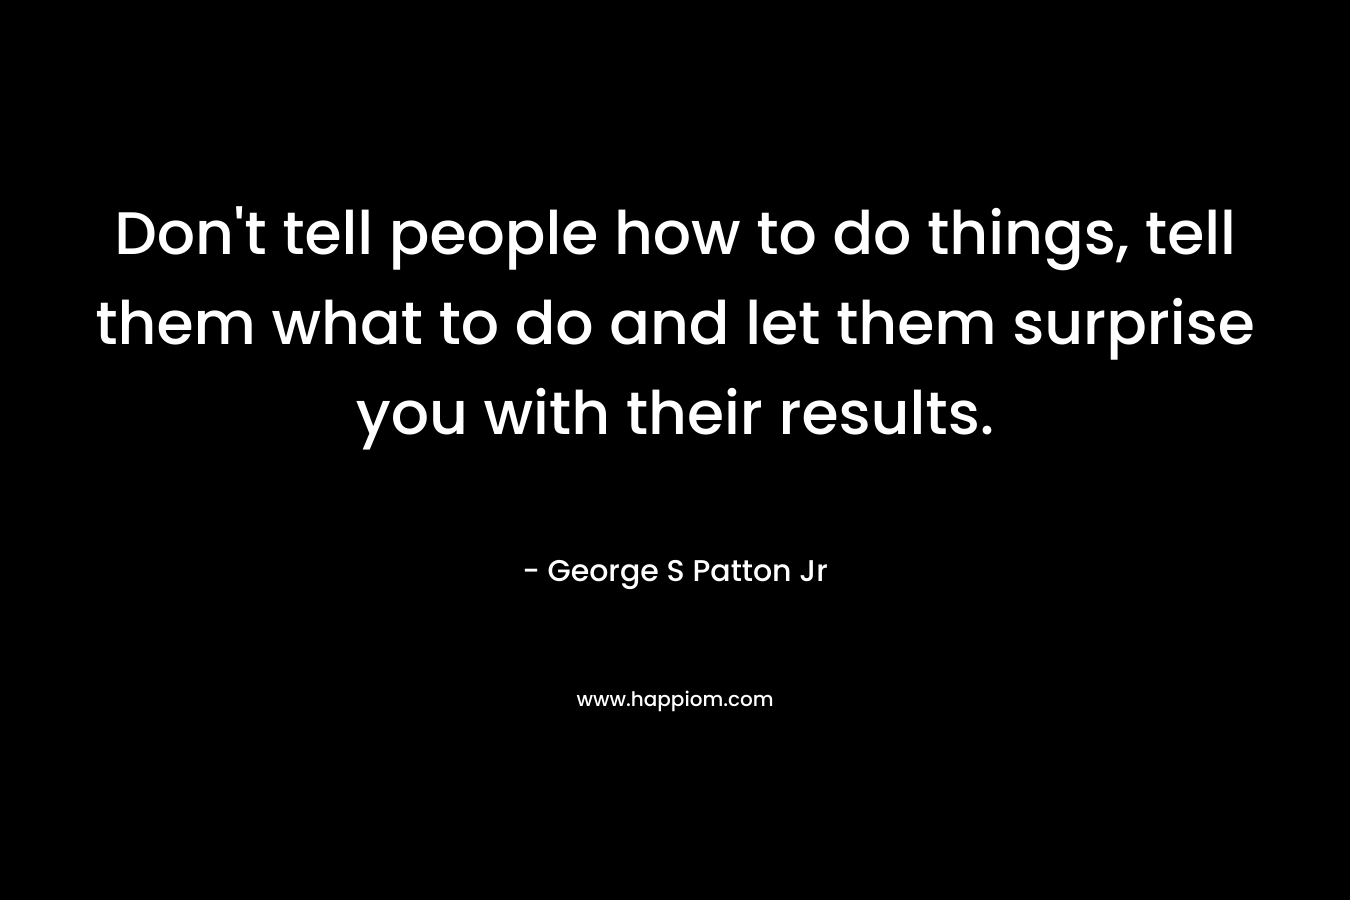 Don't tell people how to do things, tell them what to do and let them surprise you with their results.